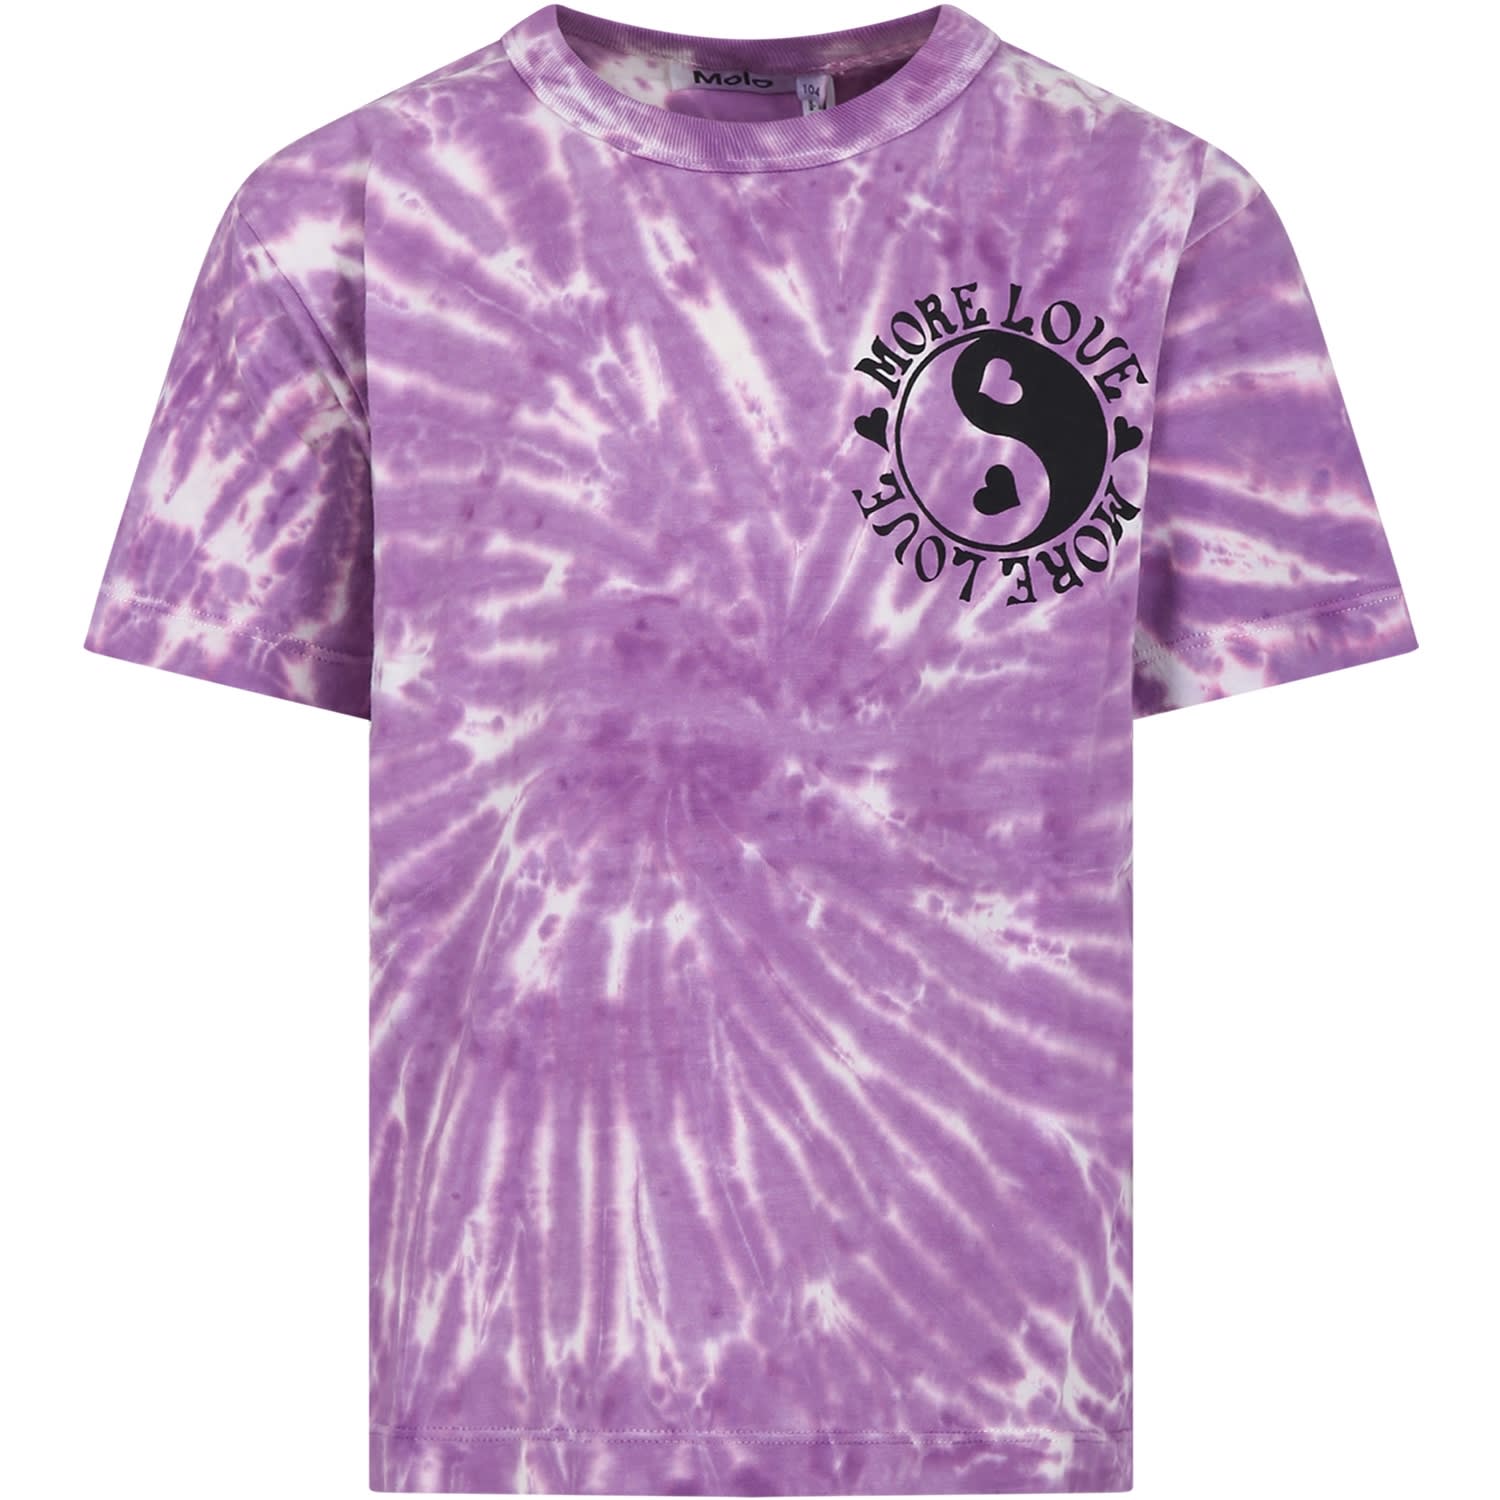 Molo Kids' Purple T-shirt For Girl With Print And Writing In Violet